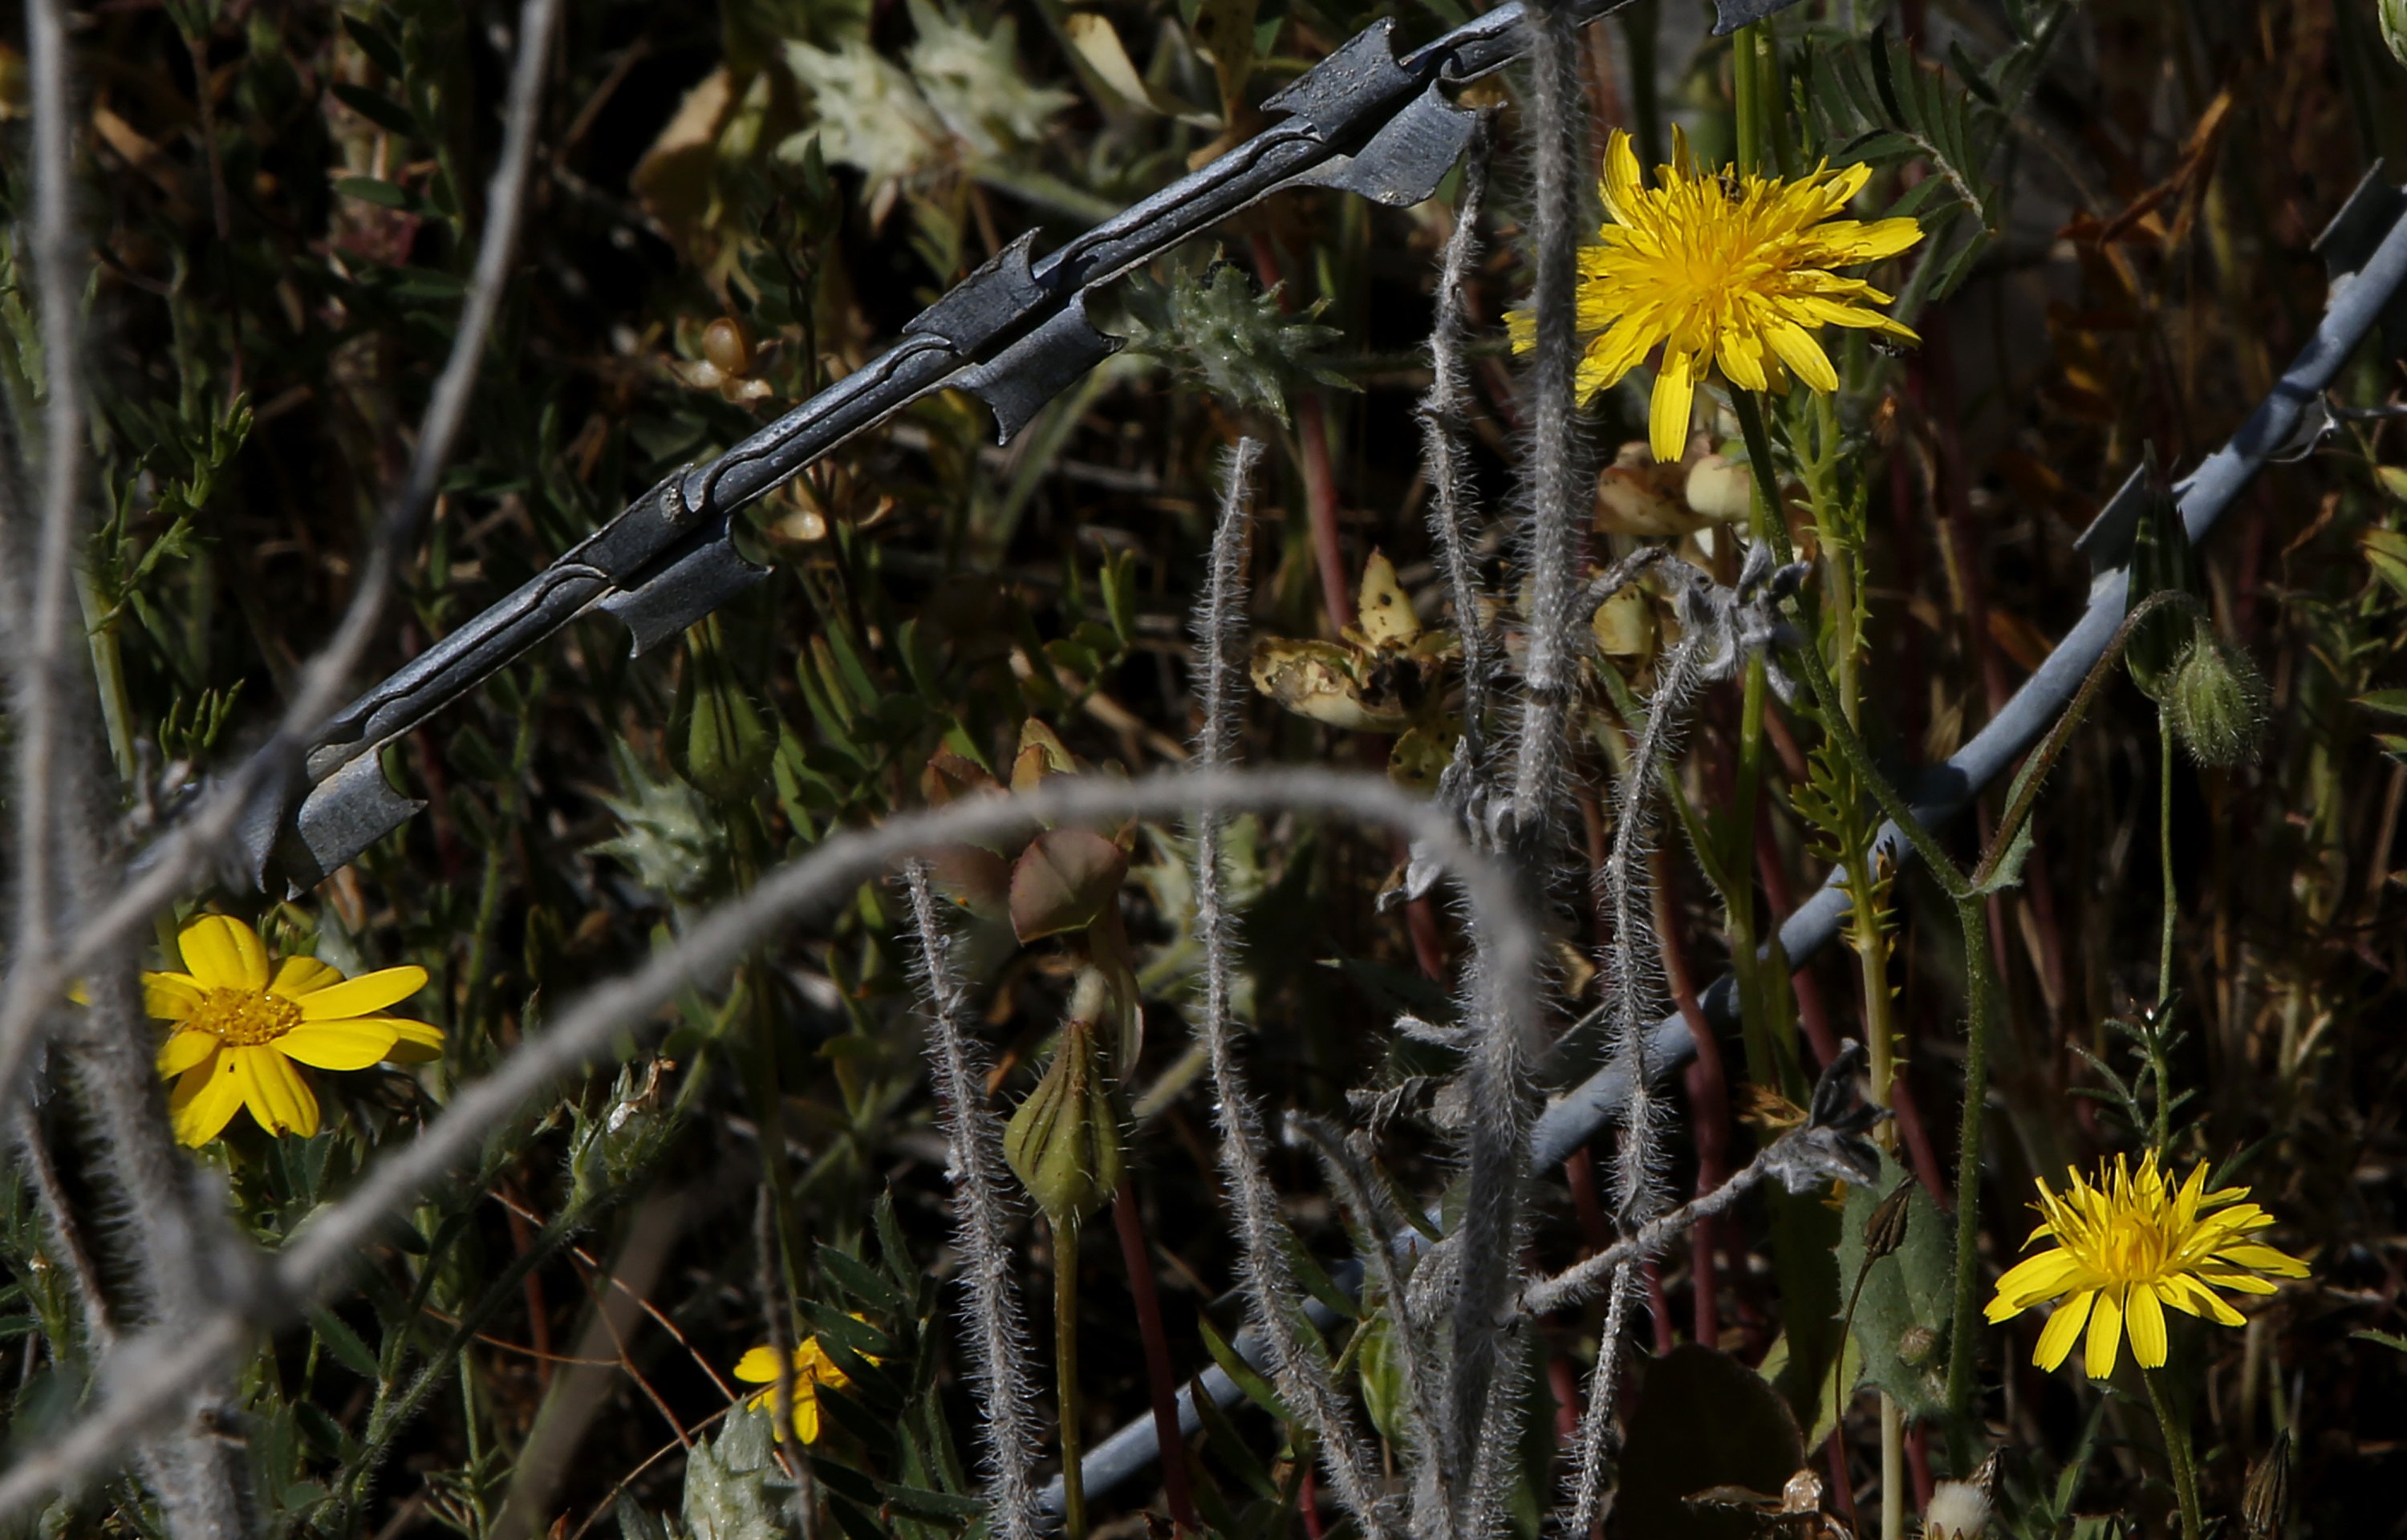 Wildflowers are seen through barbed wire inside the U.N.-controlled buffer zone that divides the Greek-controlled south and the Turkish-controlled north, on the island of Cyprus, March 26, 2021. (AP Photo)